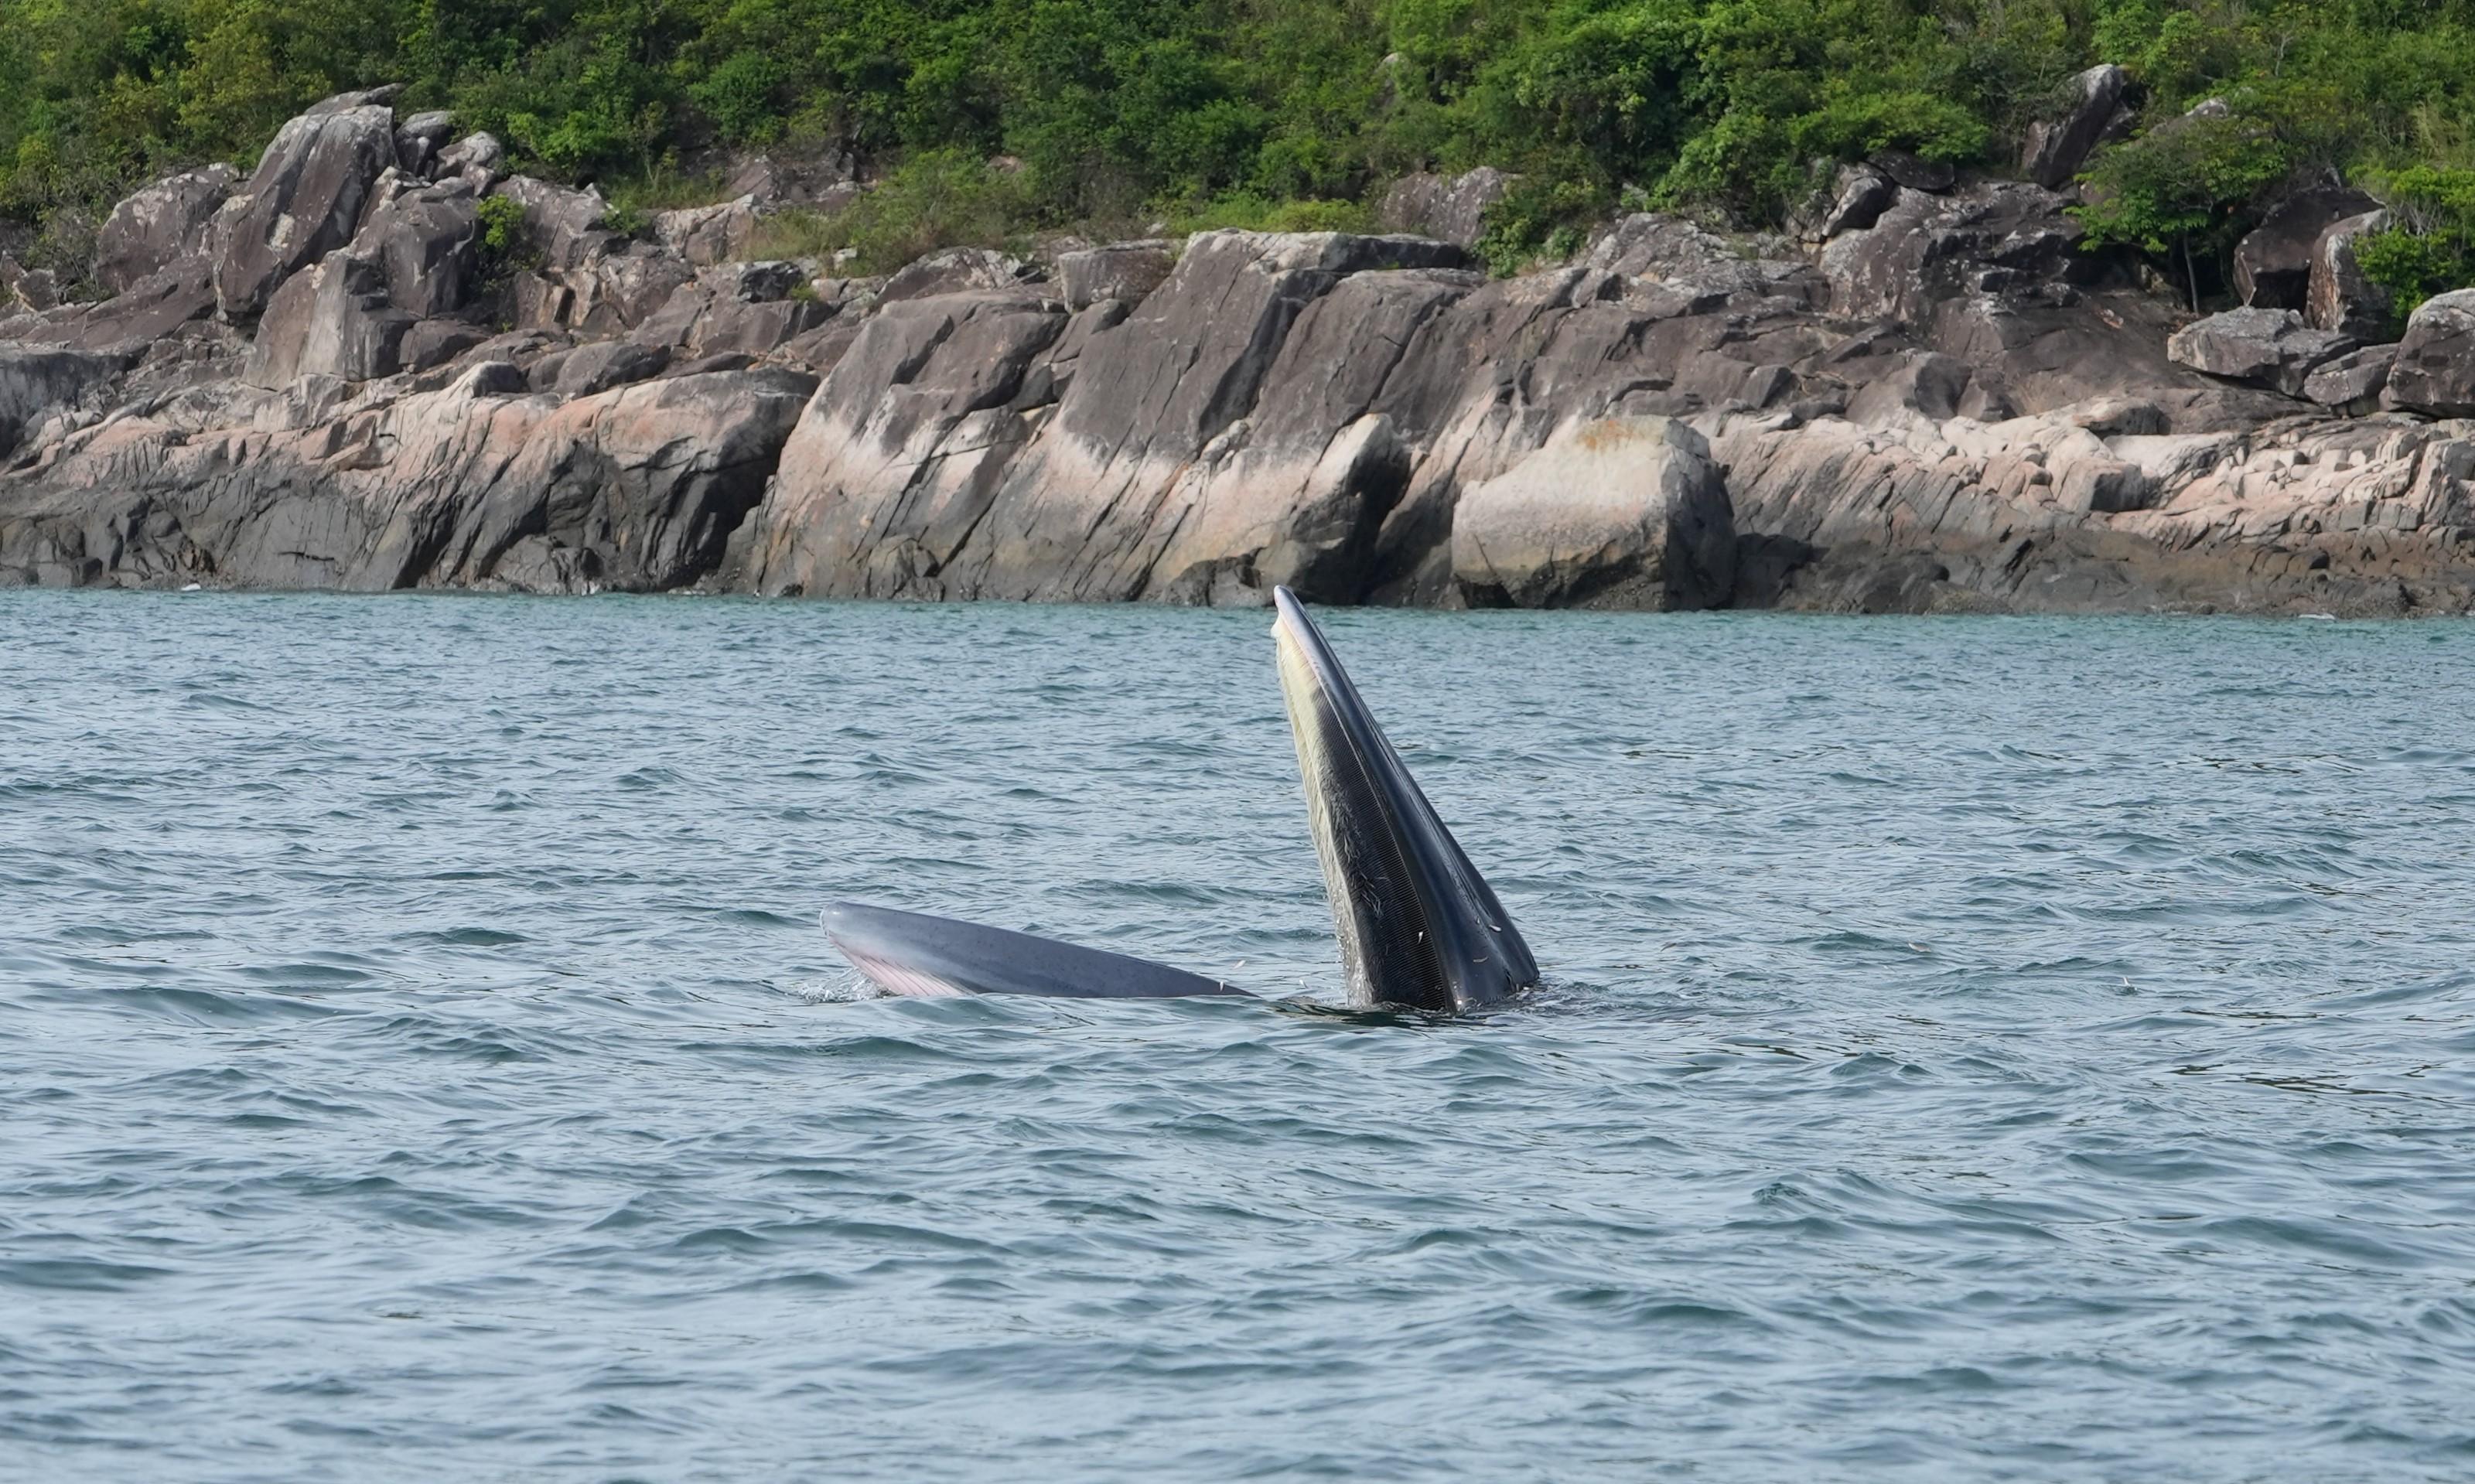 Regarding the recent sighting of a whale in Sai Kung waters, the Agriculture, Fisheries and Conservation Department today (July 26) strongly urges members of the public not to pursue the whale. Photo shows the suspected Bryde's whale.